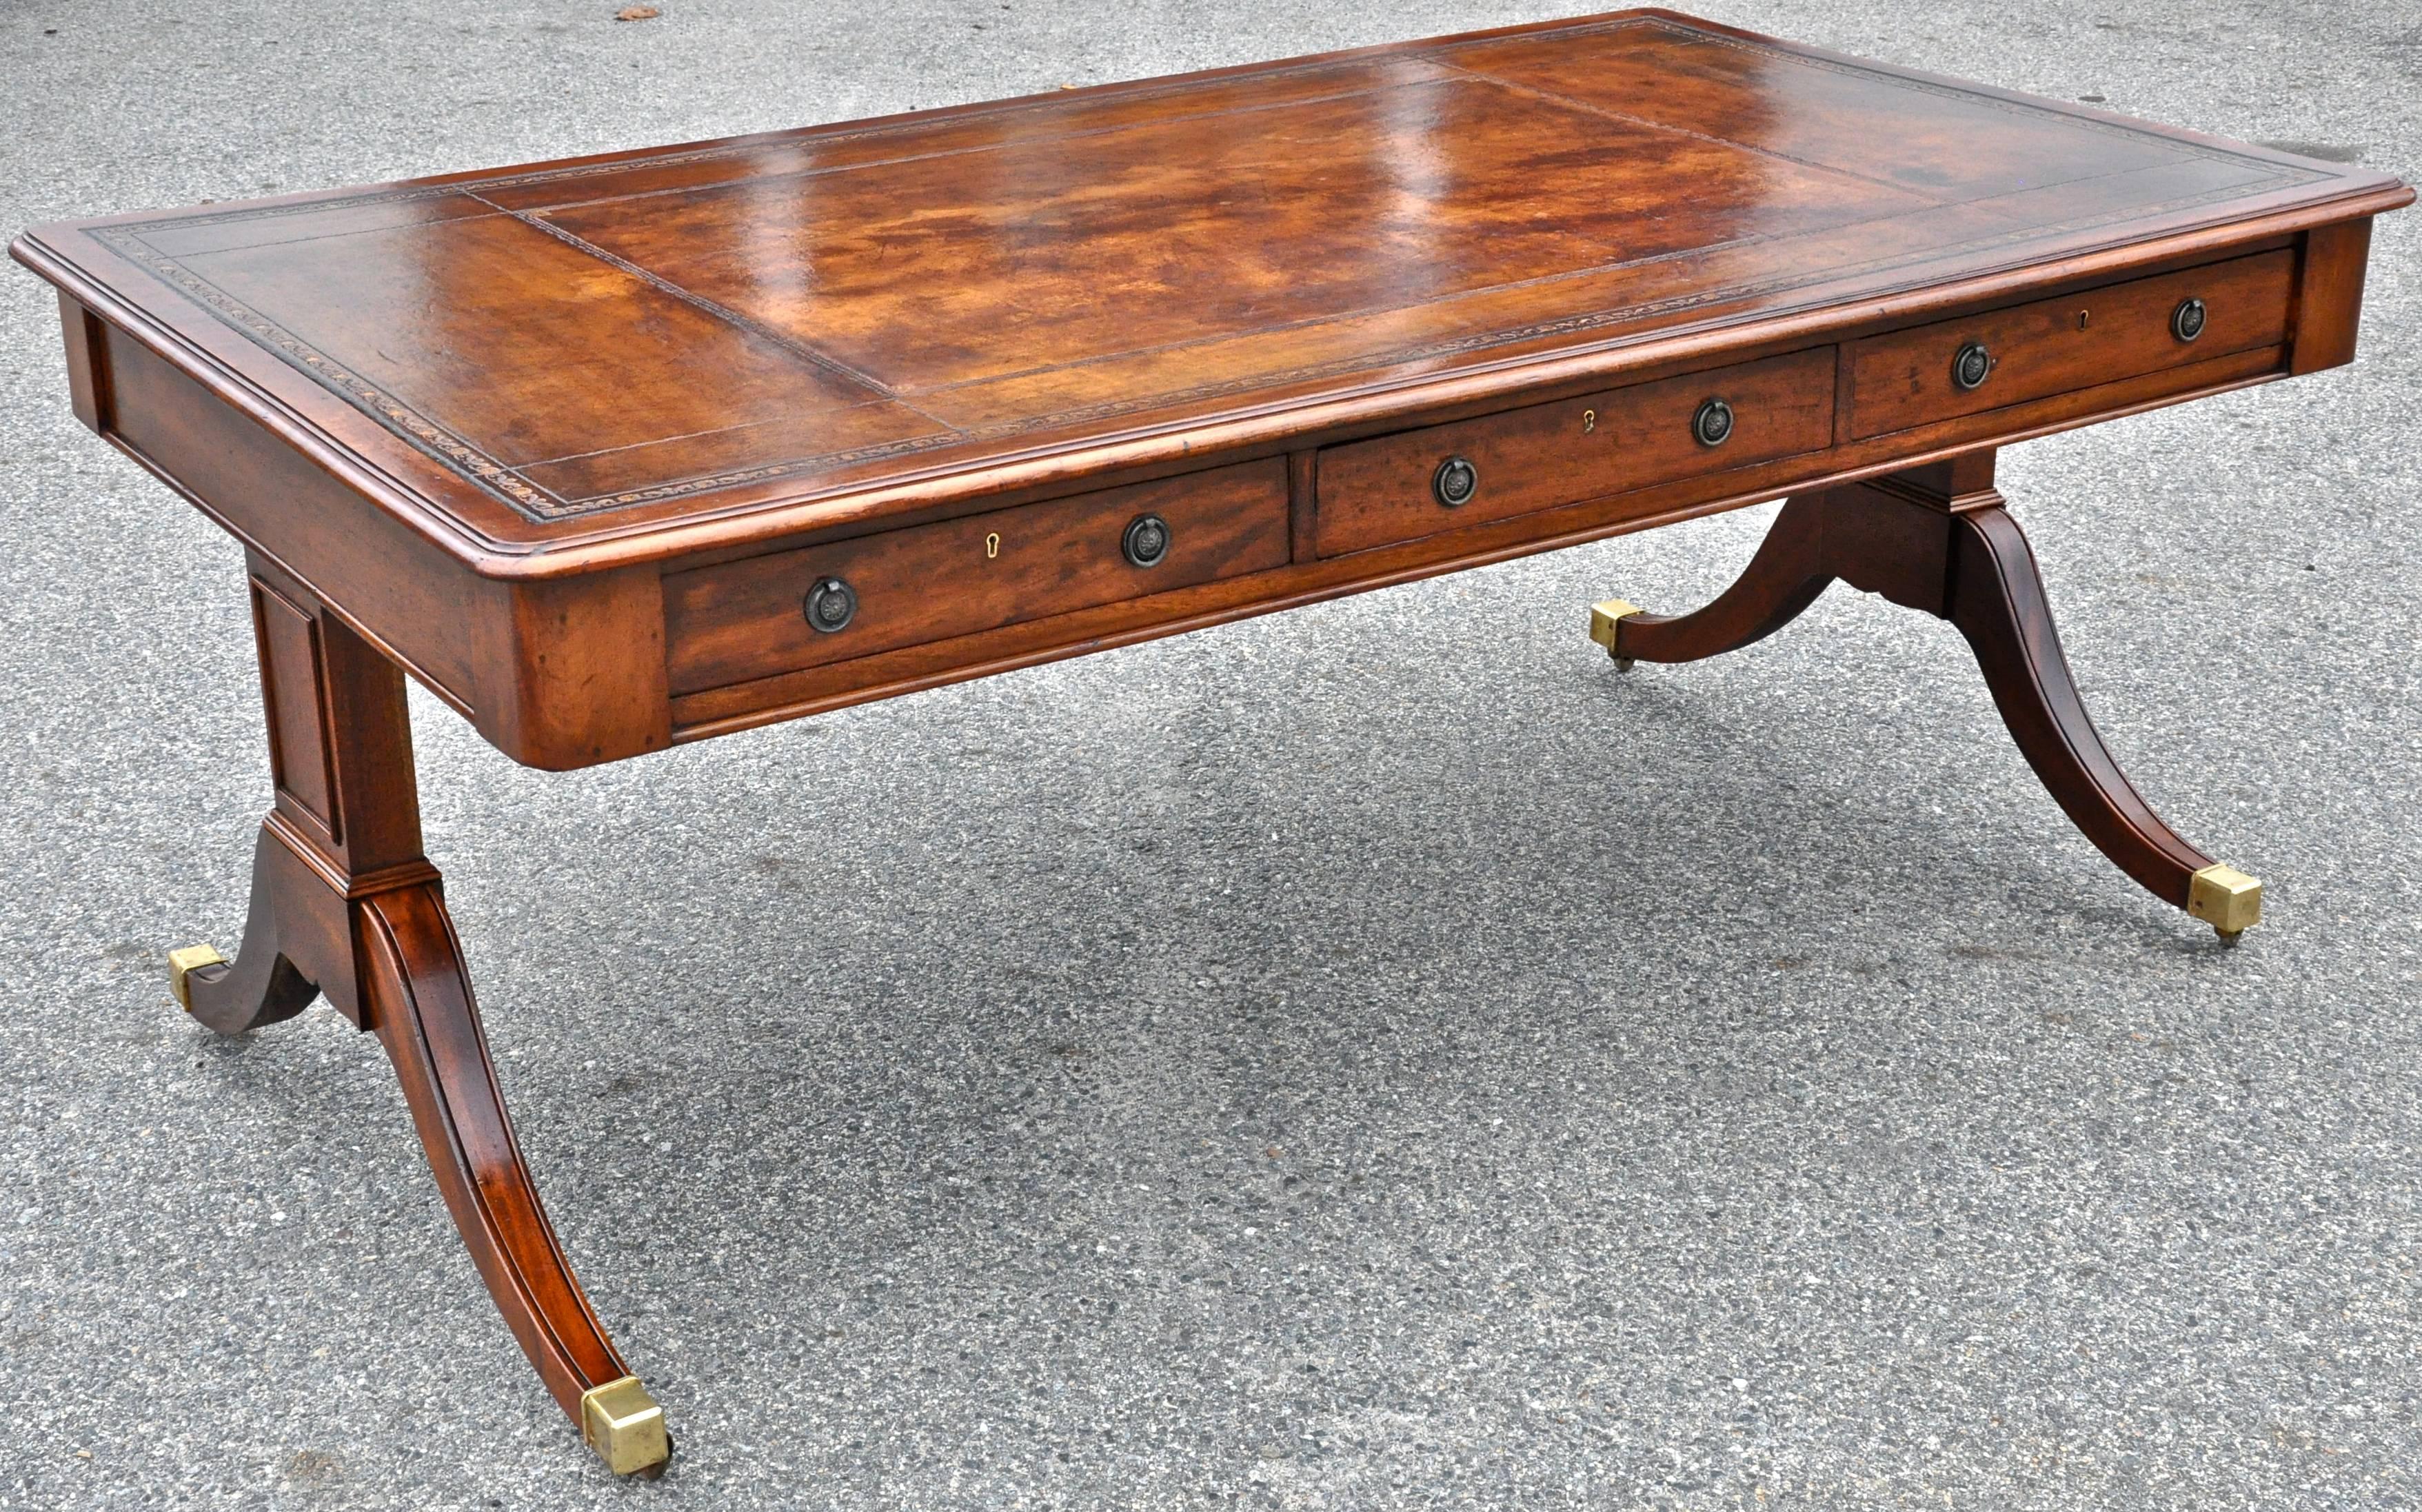 Pedestal Regency mahogany partner's desk, 19th century

Good leather top partner's desk. Drawers on both sides, finished on all sides, great size and clearance. Original tooled and embossed leather top.
       